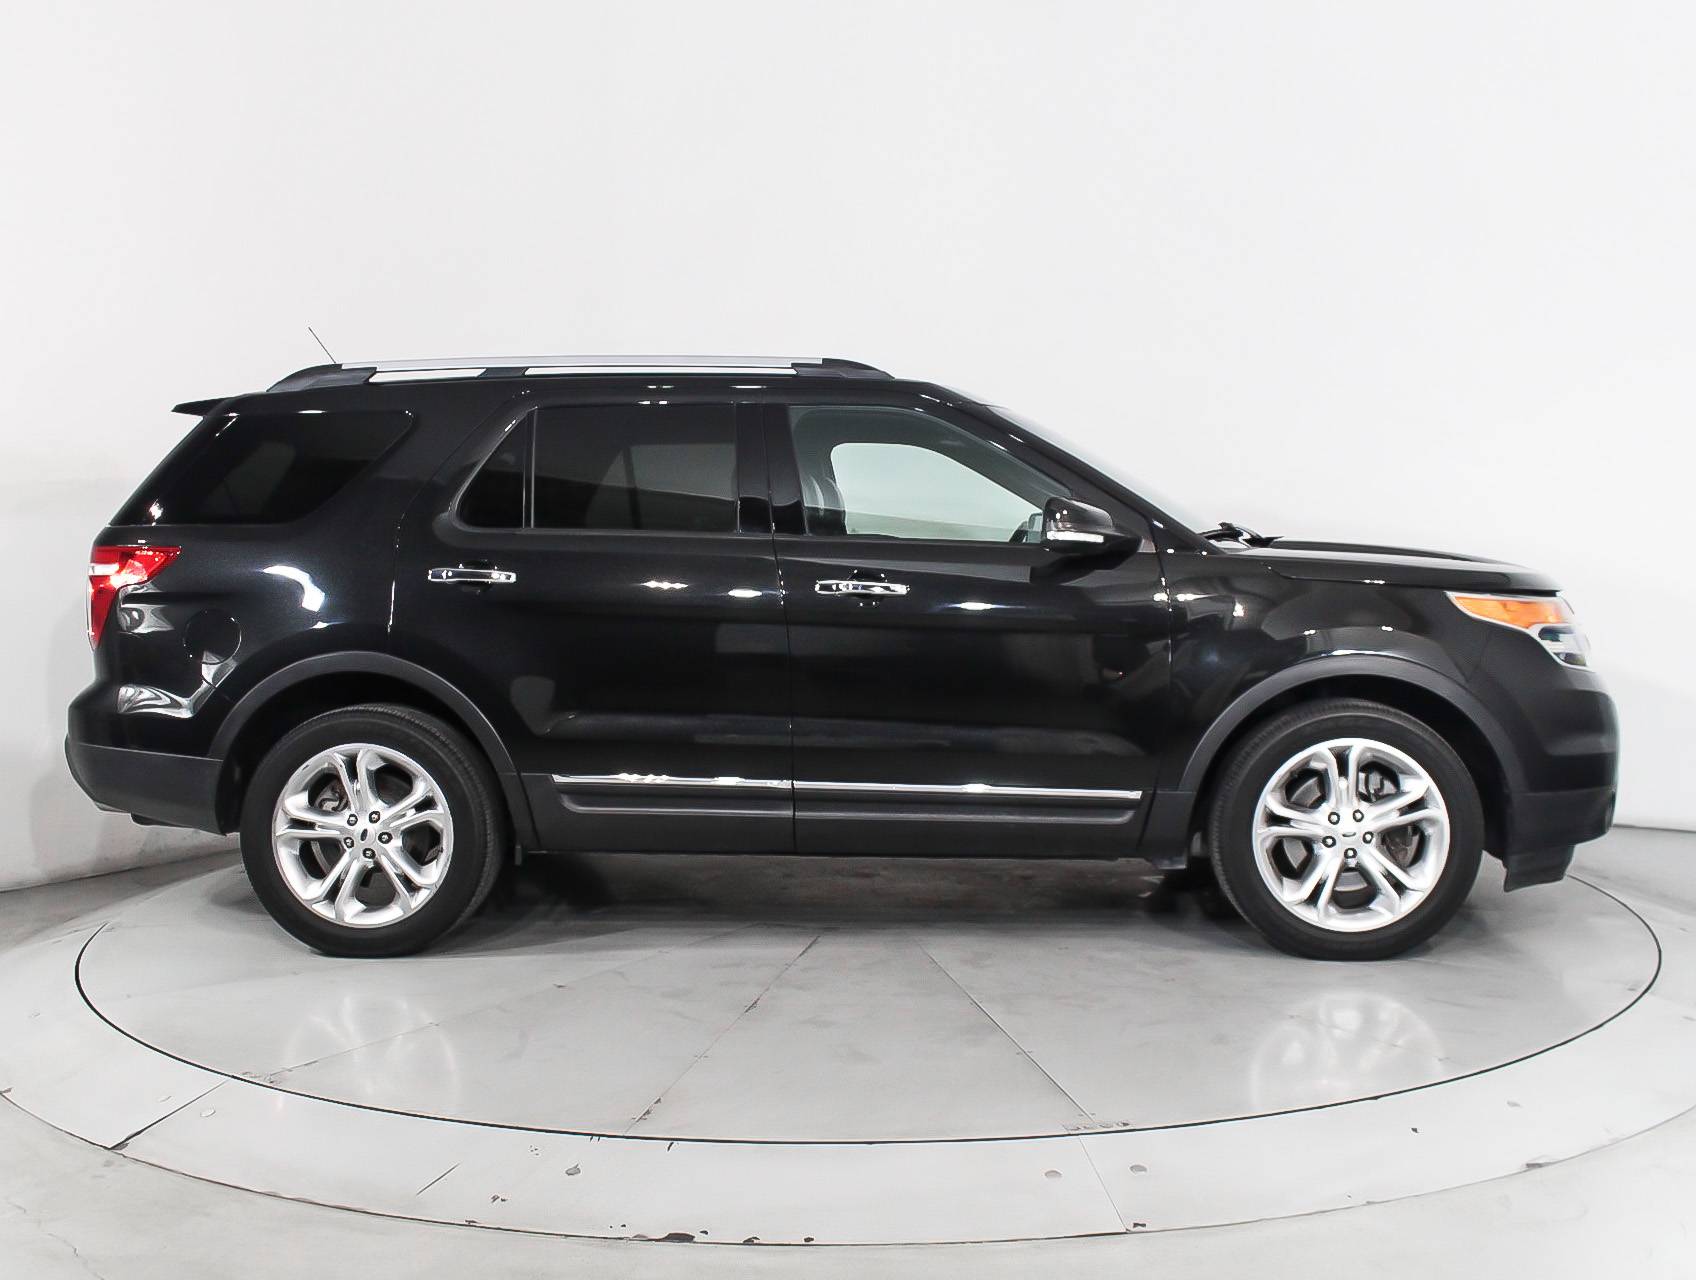 Florida Fine Cars - Used FORD EXPLORER 2014 MARGATE Limited 4x4